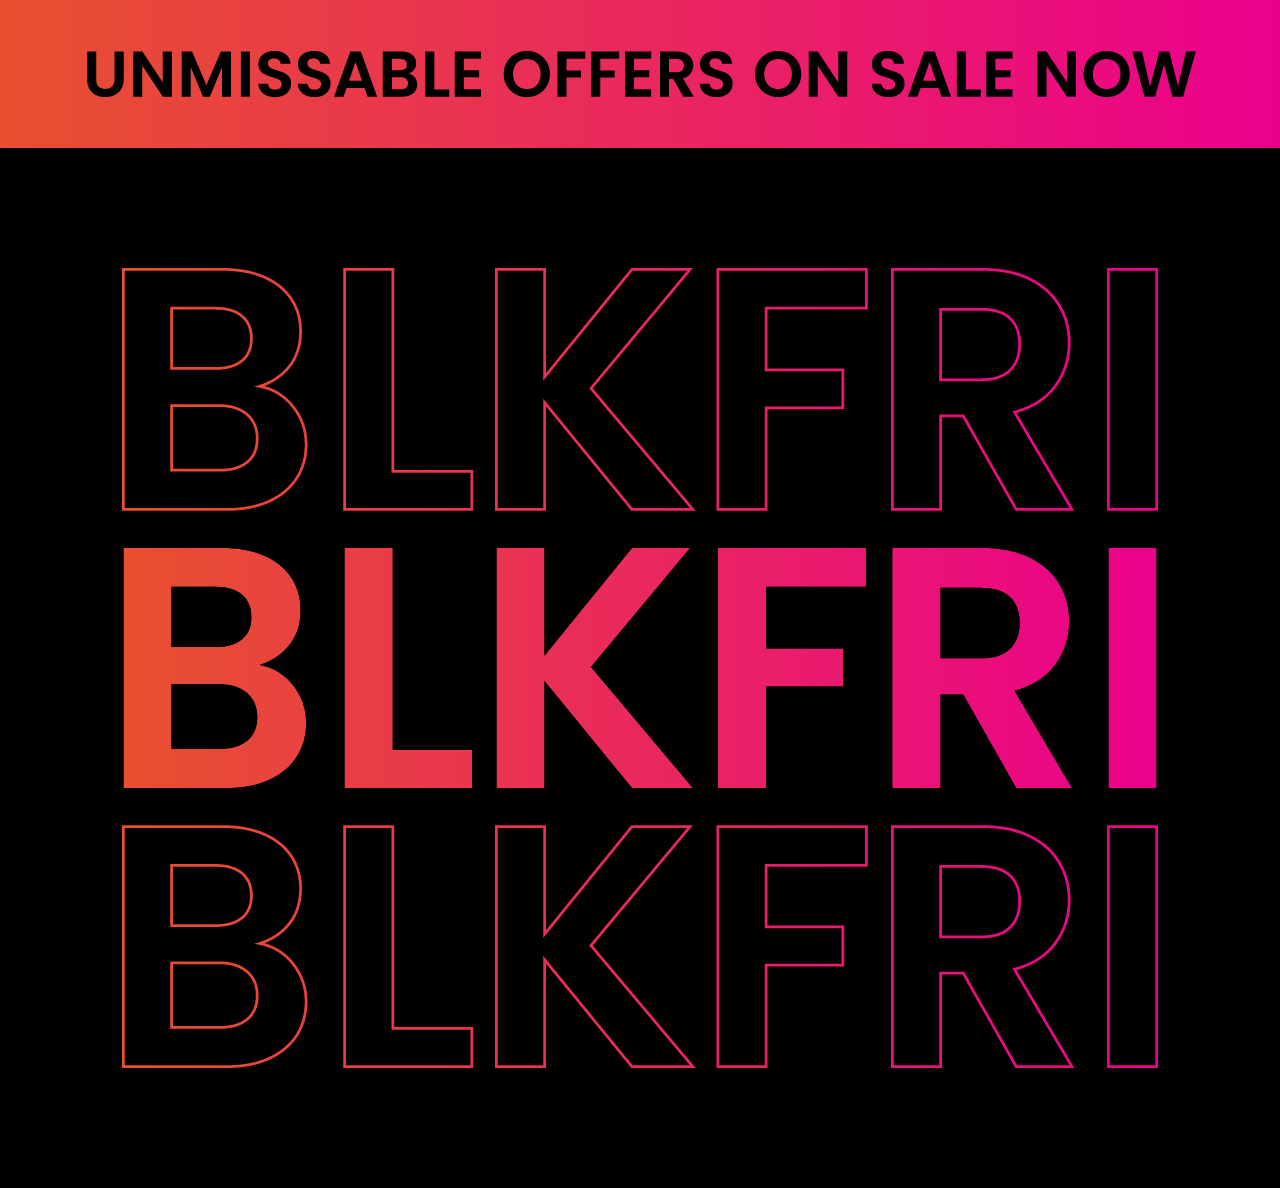 Myer One exclusive BLKFRI e-Voucher offer - Spend $150 in one day and earn a $15 e-Voucher